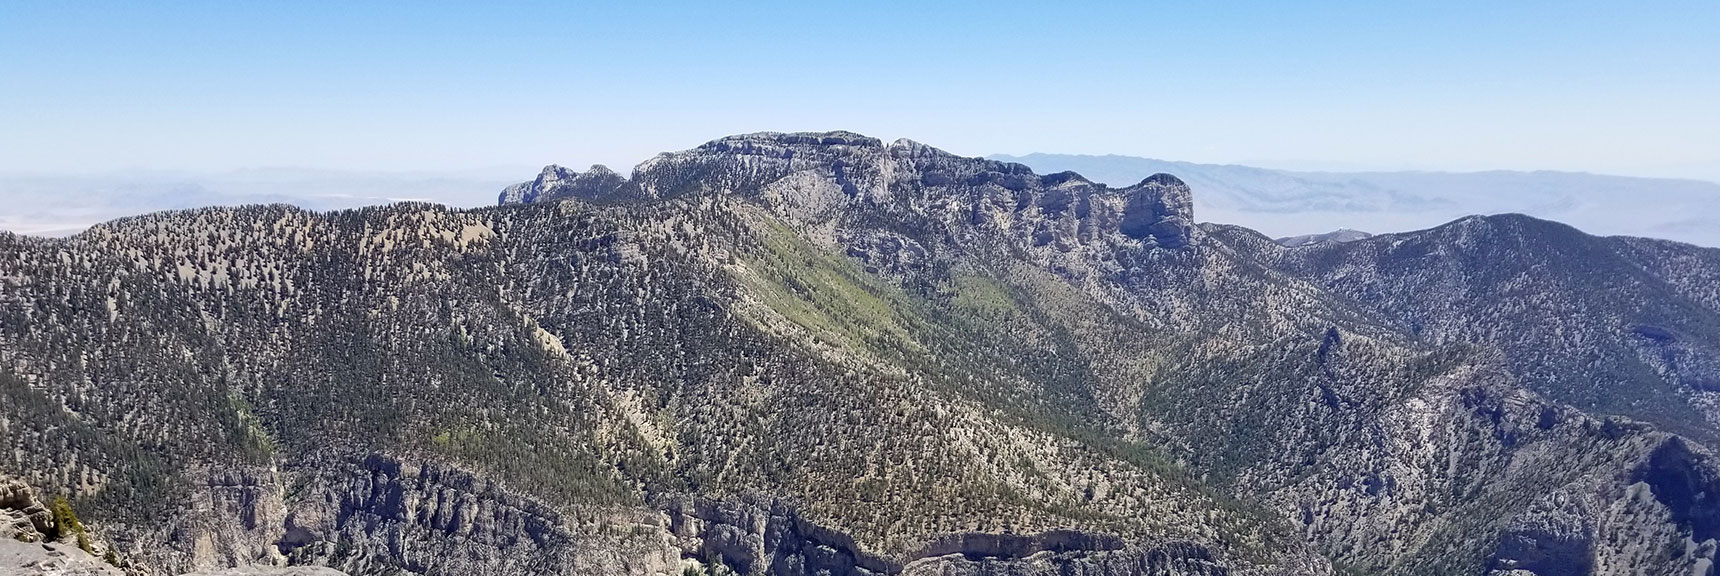 Mummy Mountain Viewed from Kyle Canyon Upper South Rim